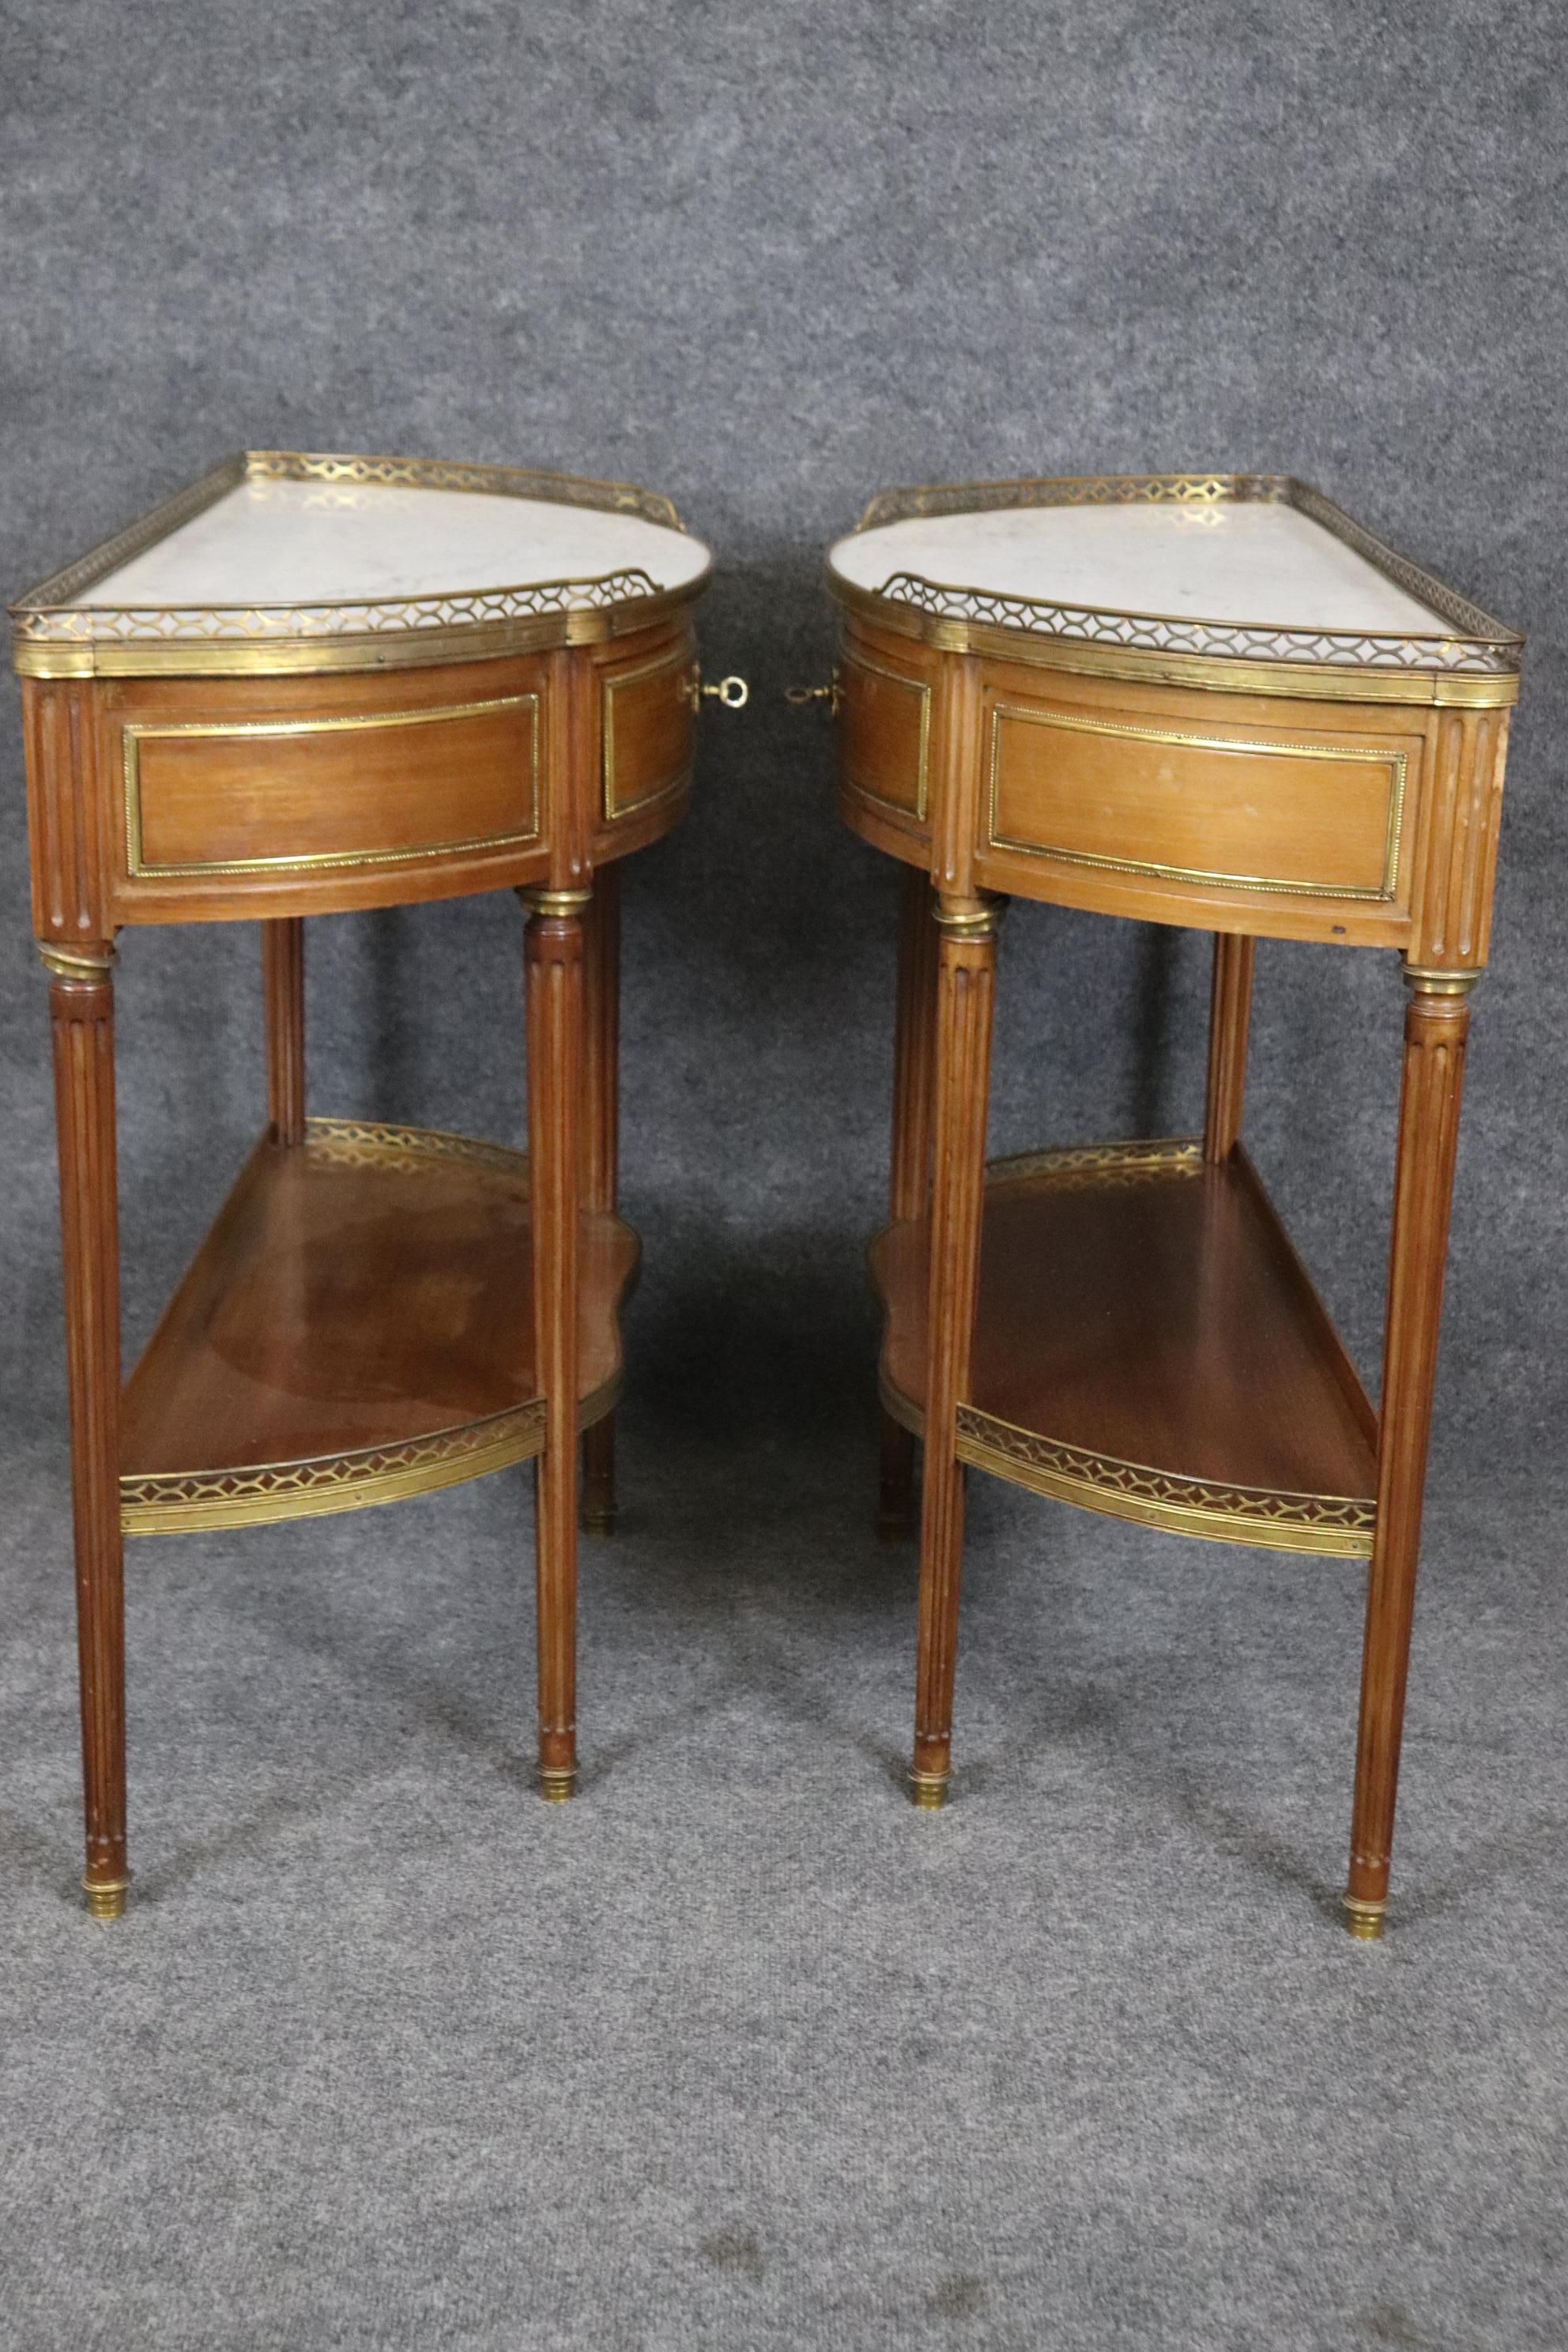  Superb Pair of Marble Top Bronze Mounted French Demilune Console Tables  For Sale 2